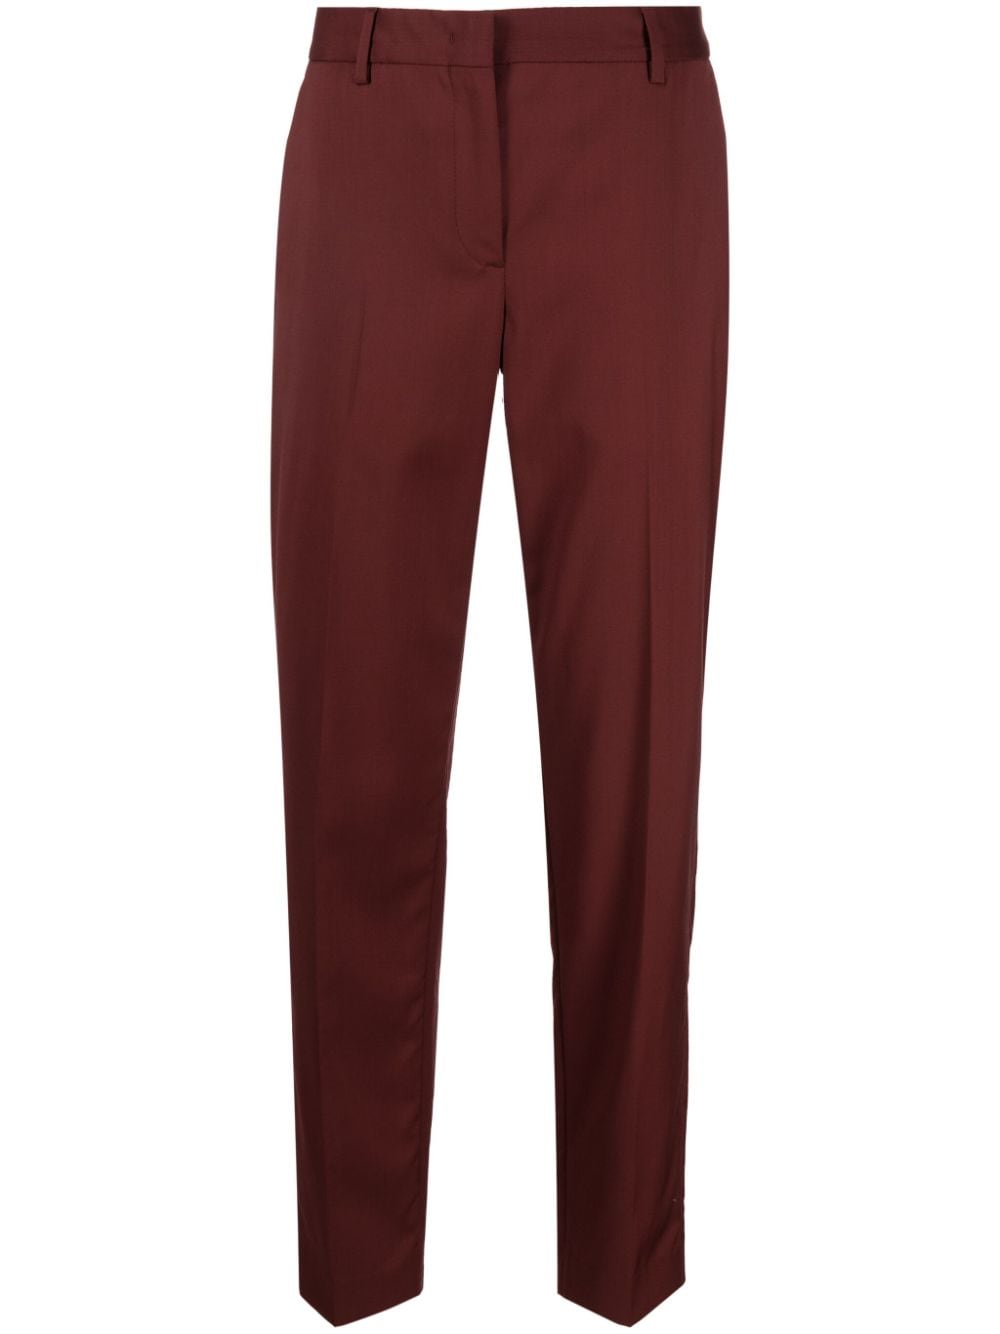 Paul Smith wool tapered trousers von Paul Smith